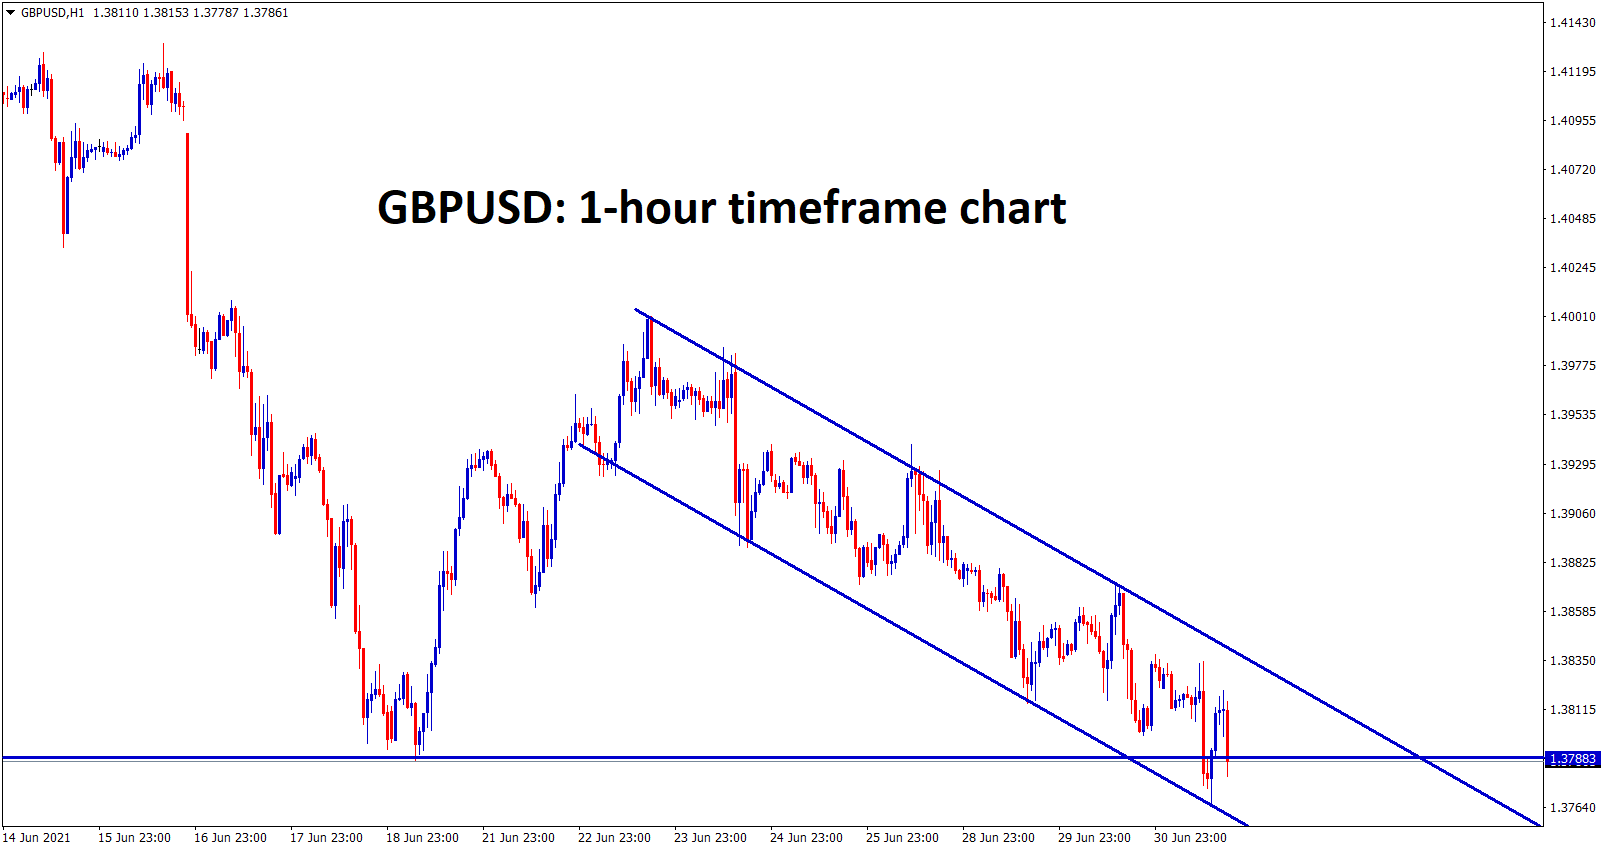 GBPUSD moving in a descending channel and it hits the recent support zone